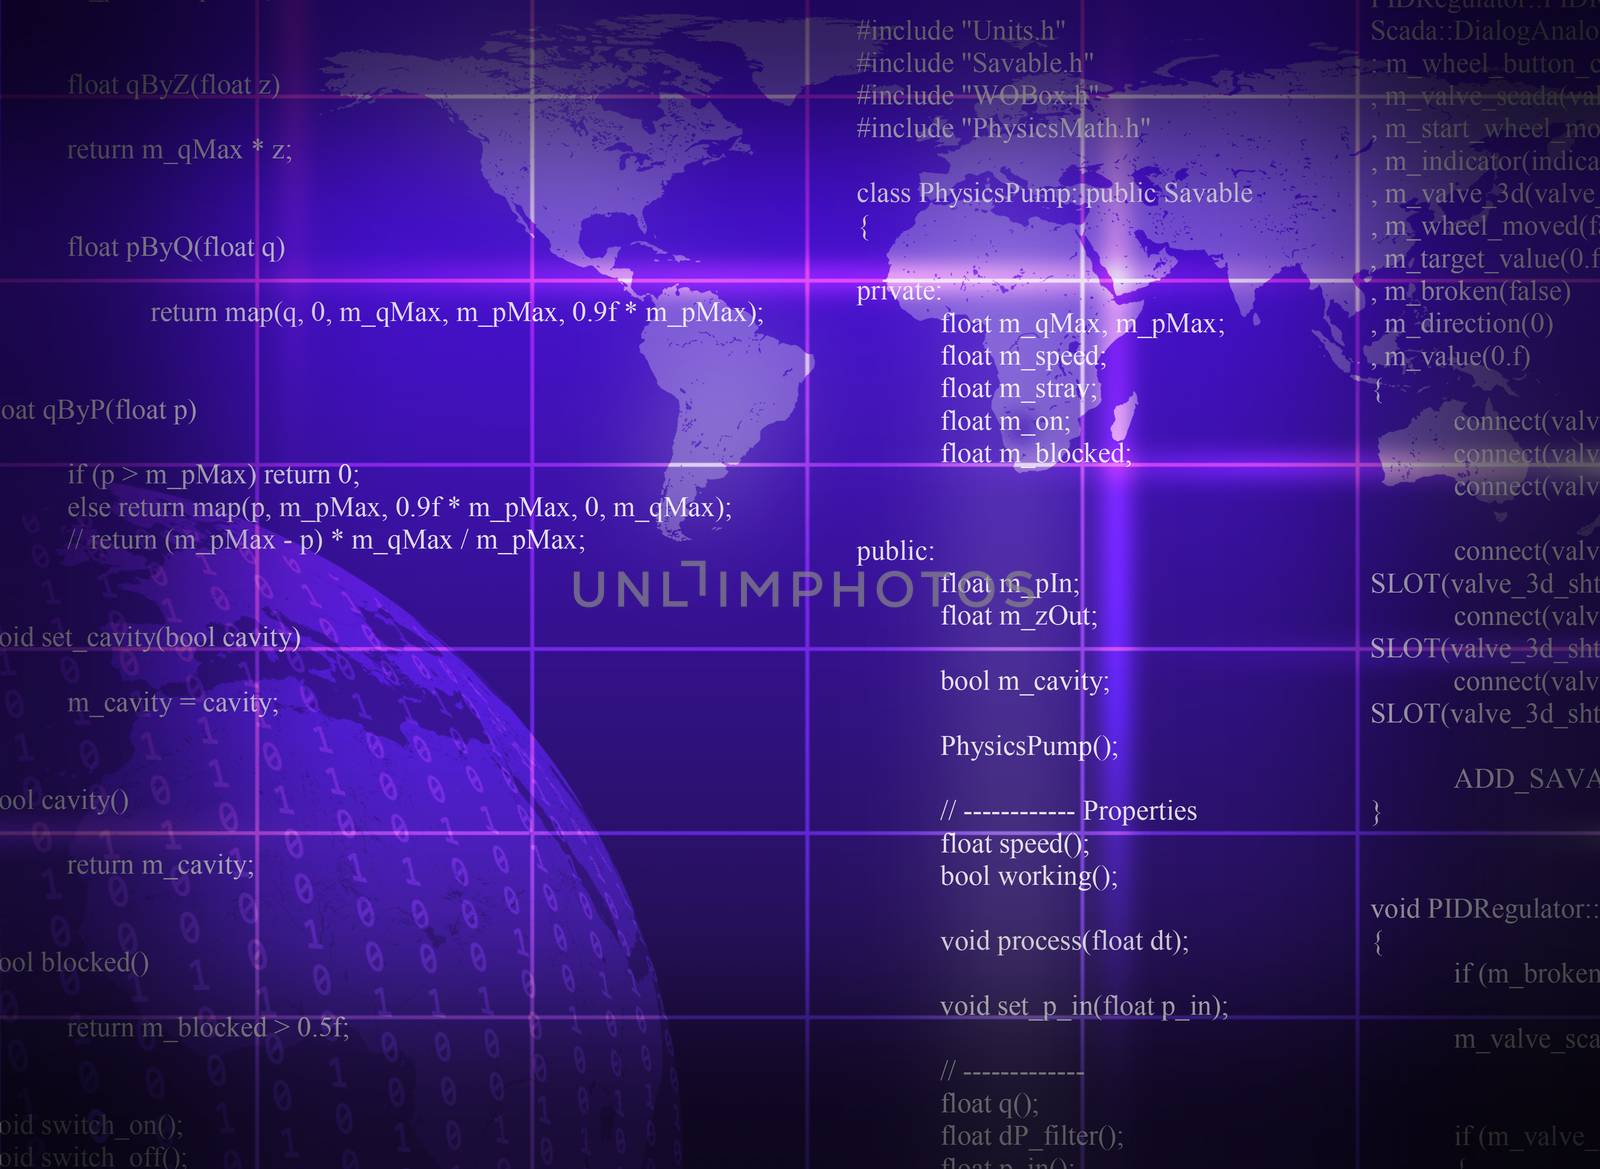 Purple abstract background with world map and matrix. Elements of this image furnished by NASA